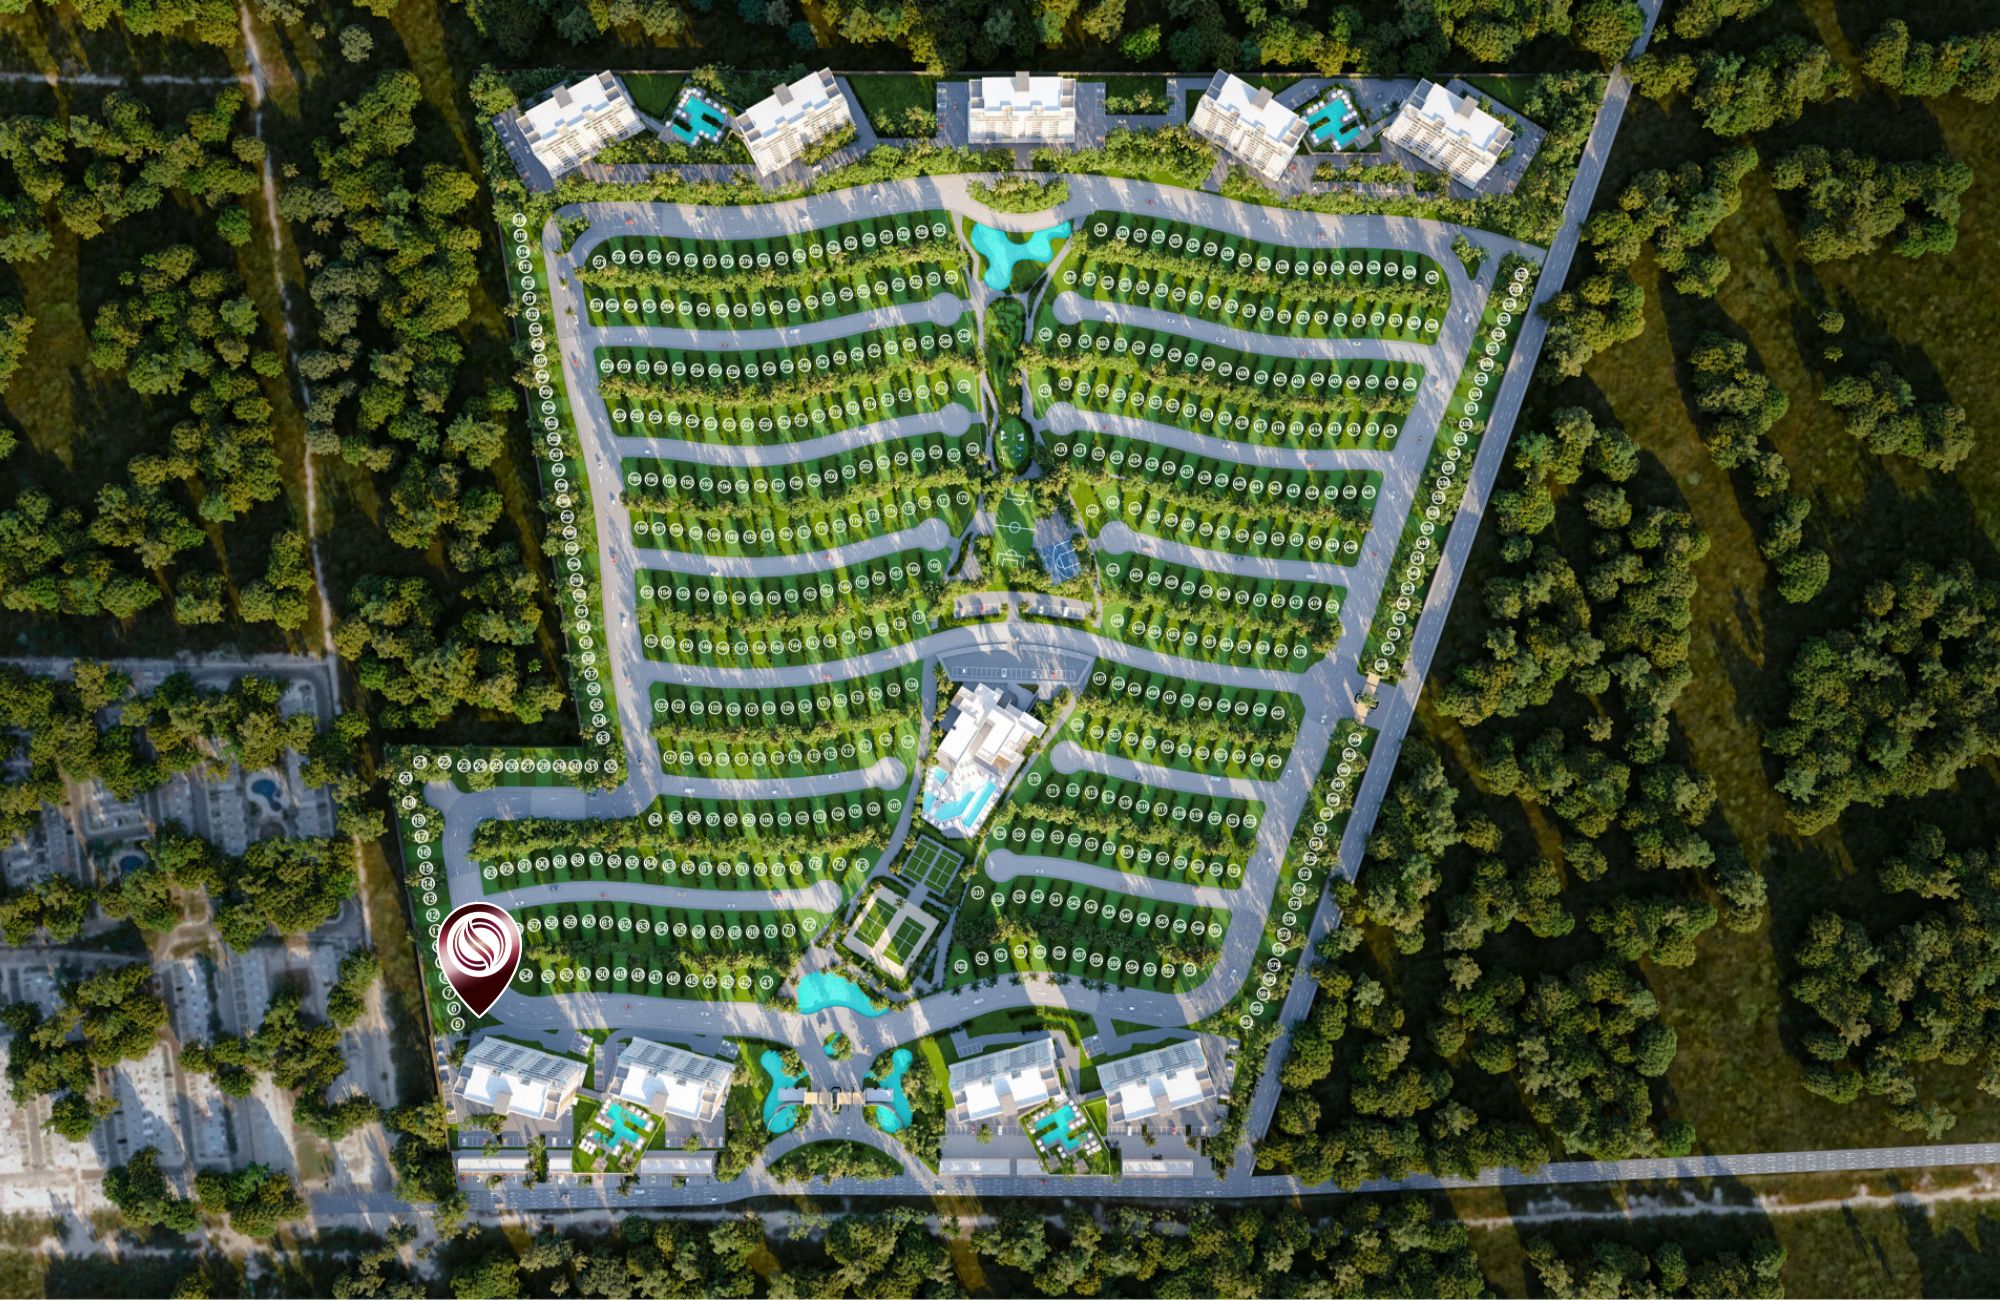 Land in a private residential area with a clubhouse, sports courts, pool, dog areas and more for sale Playa del Carmen.